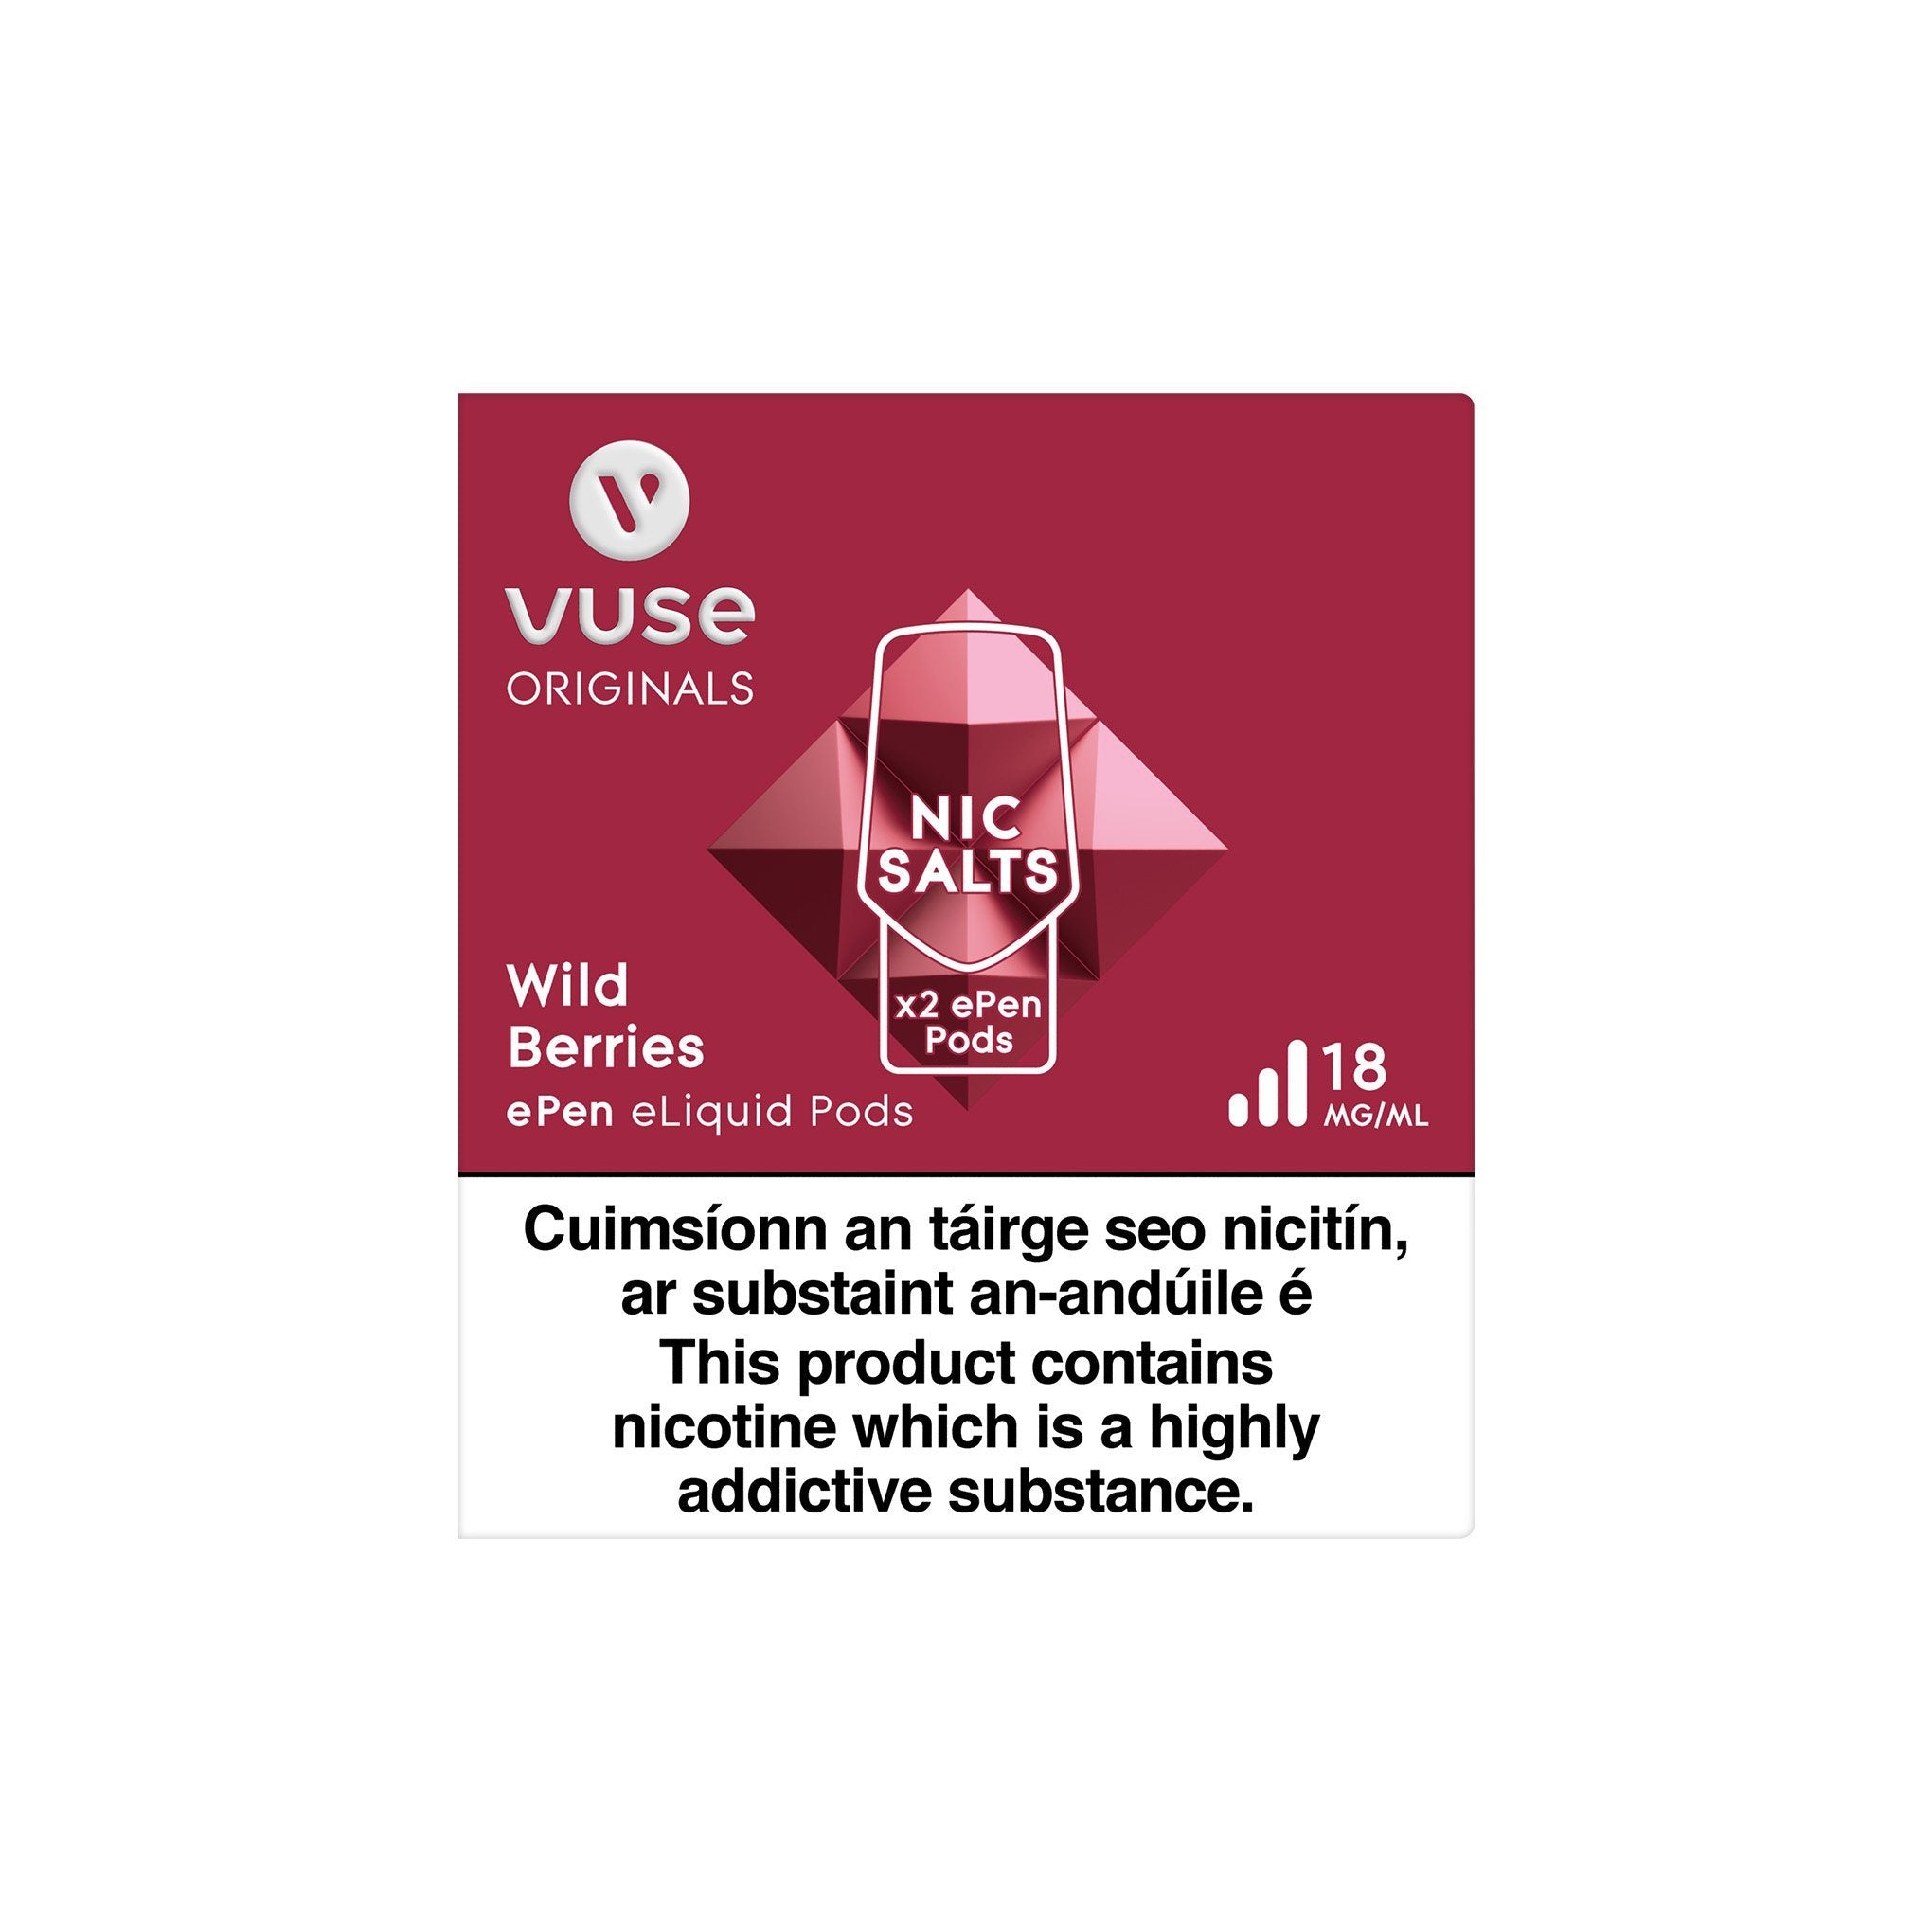 VUSE ePen 3 Cartridges Wild Berries 18MG vPro - High Nicotine 